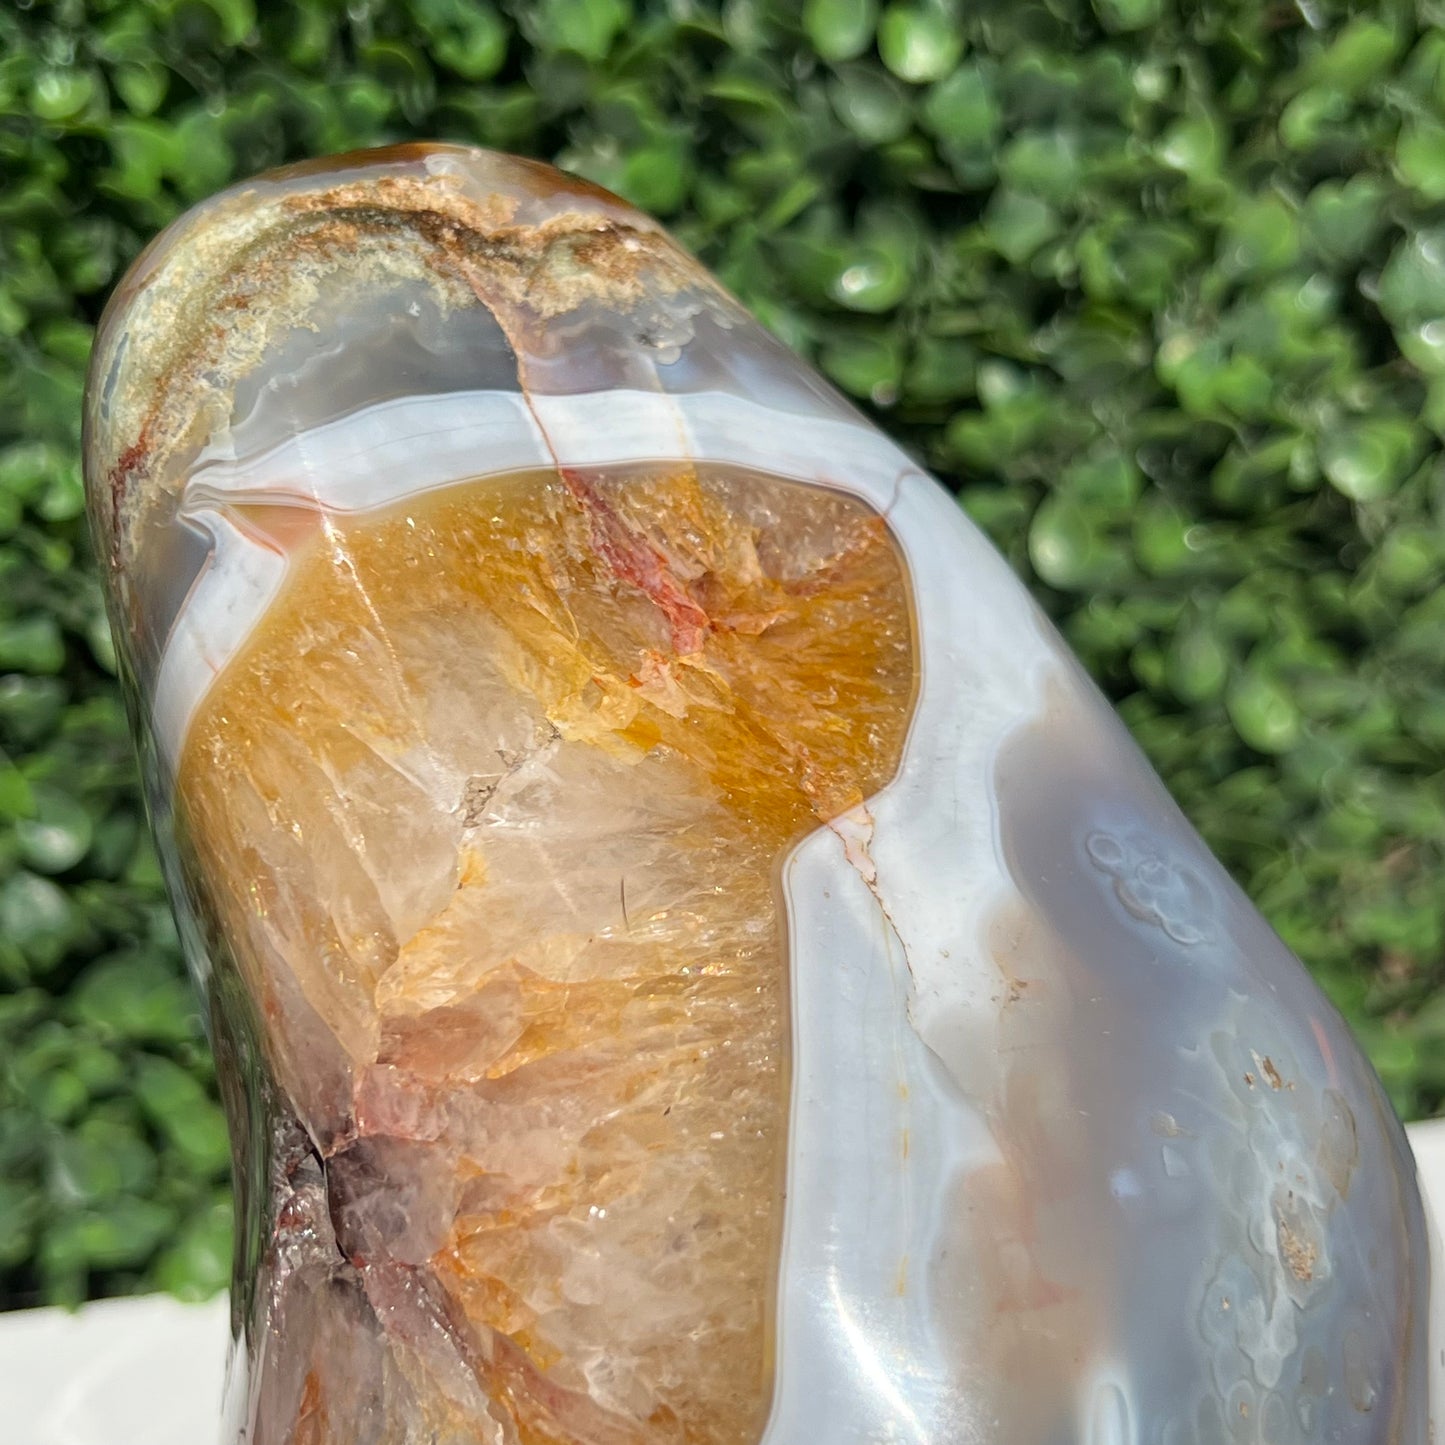 Orca Agate Free Form With Inclusion’s